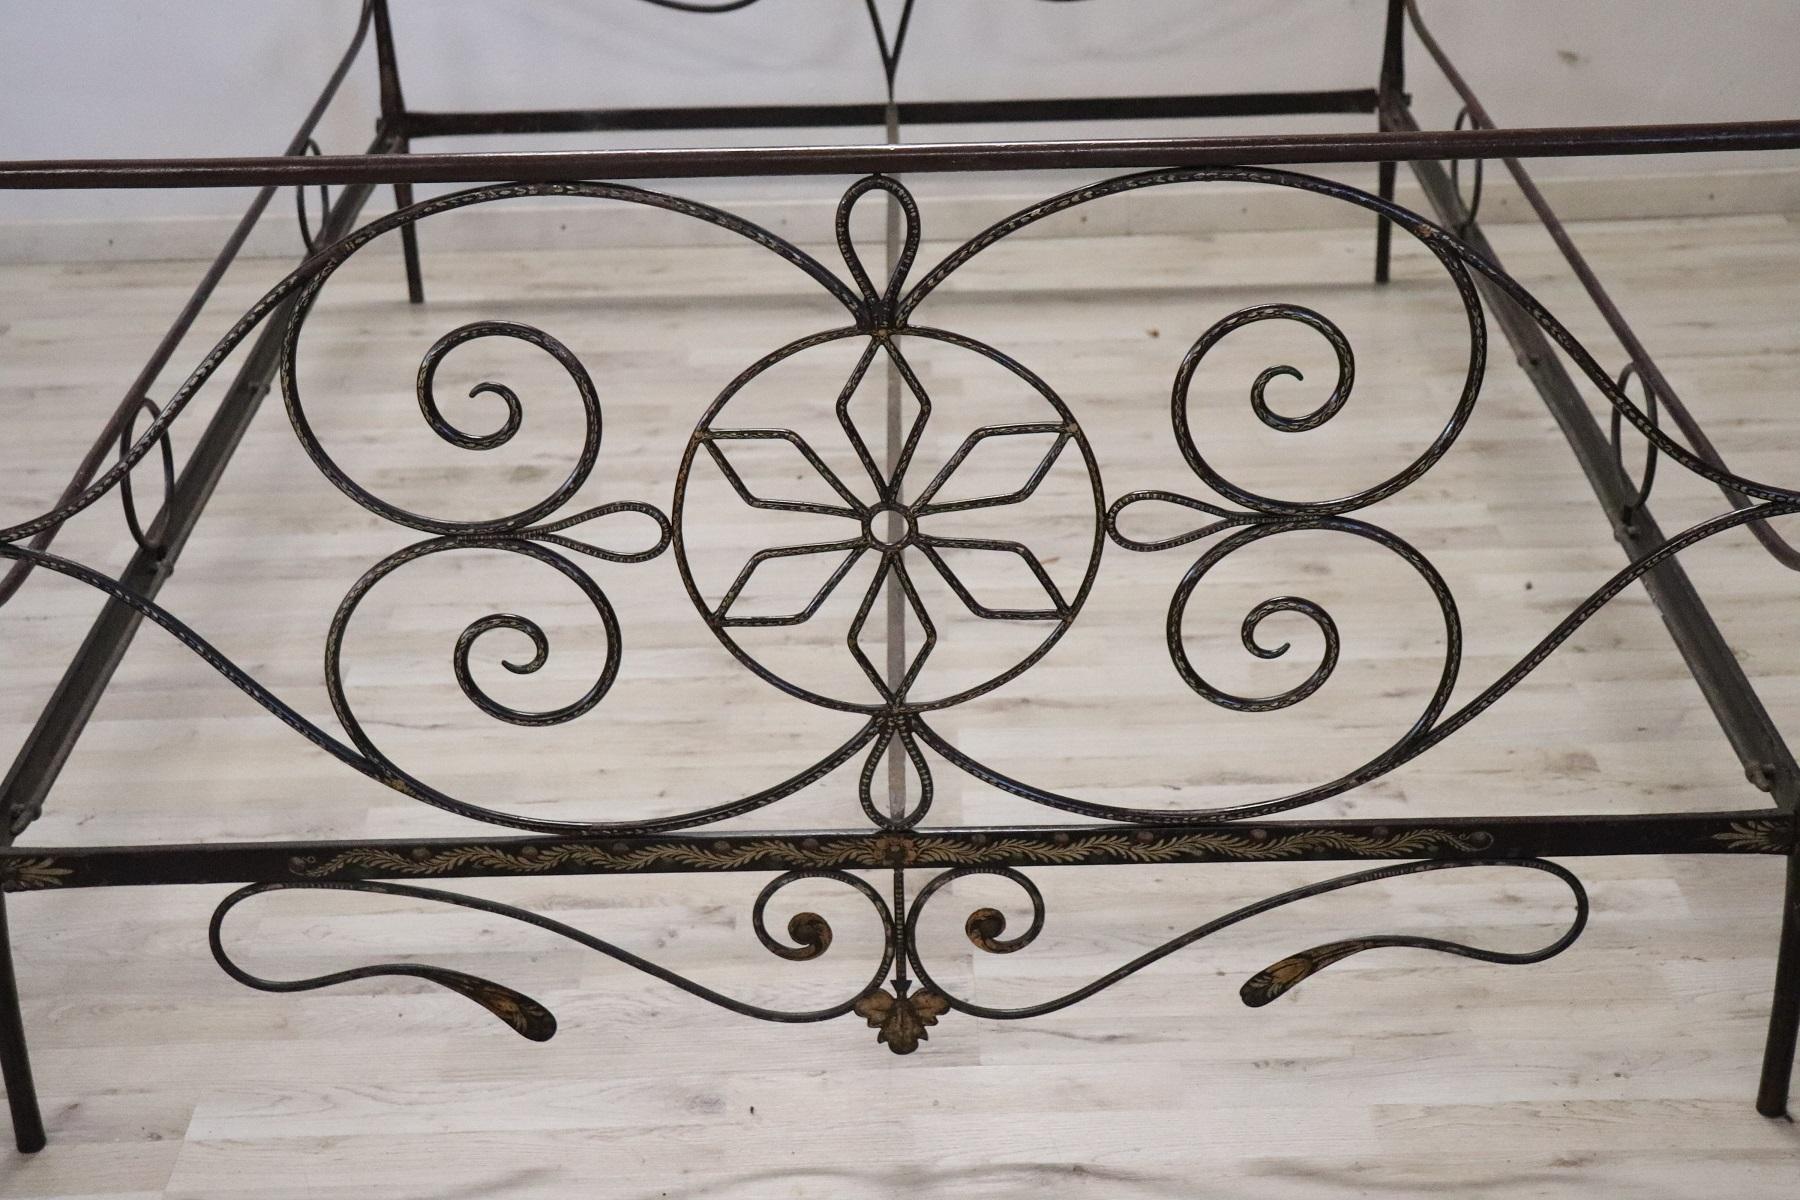 Delicious Italian antique large single bed in iron, 1800. An elaborate wrought iron decoration with many curls and swirls. Internal dimensions inch W 58.26 D 77.16 cm W 148. D 196. Attention this bed will be shipped disassembled, assembly is not